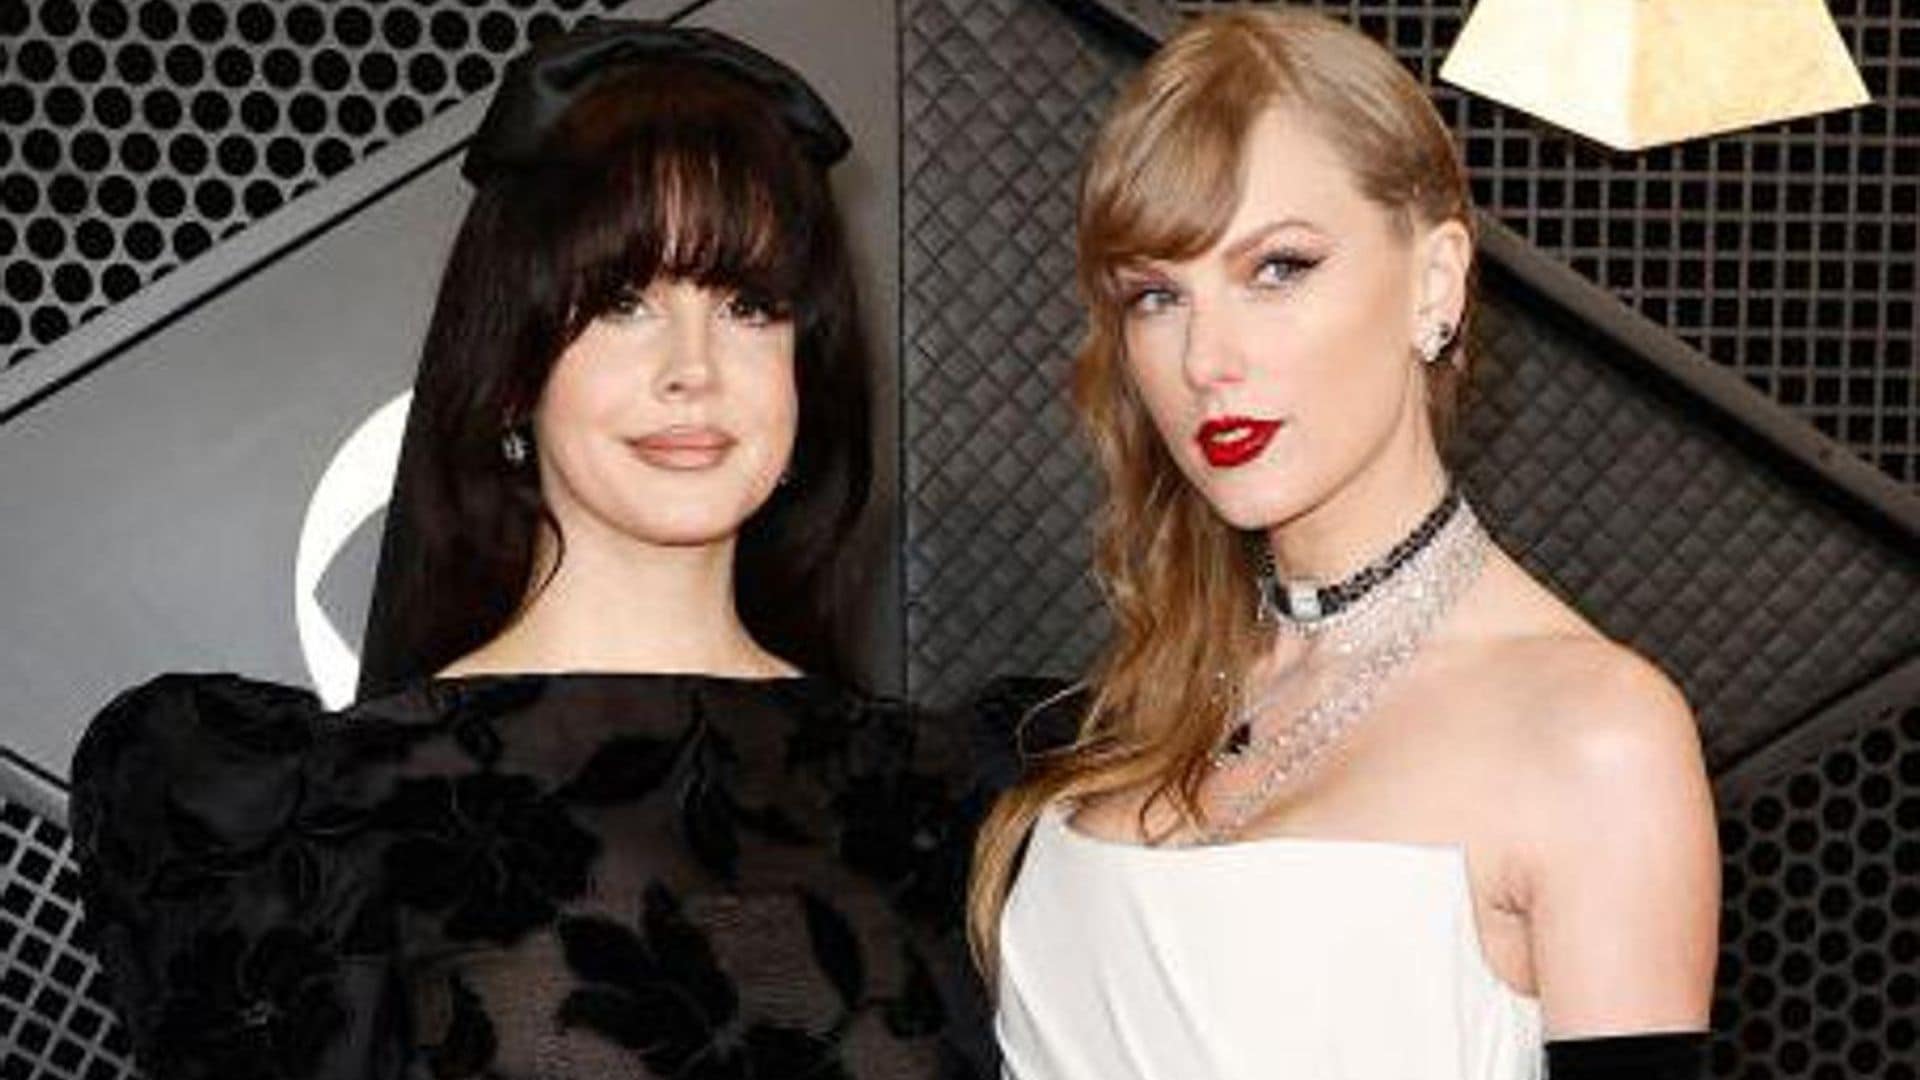 Taylor Swift at Coachella? Why fans think she might perform with Lana Del Rey